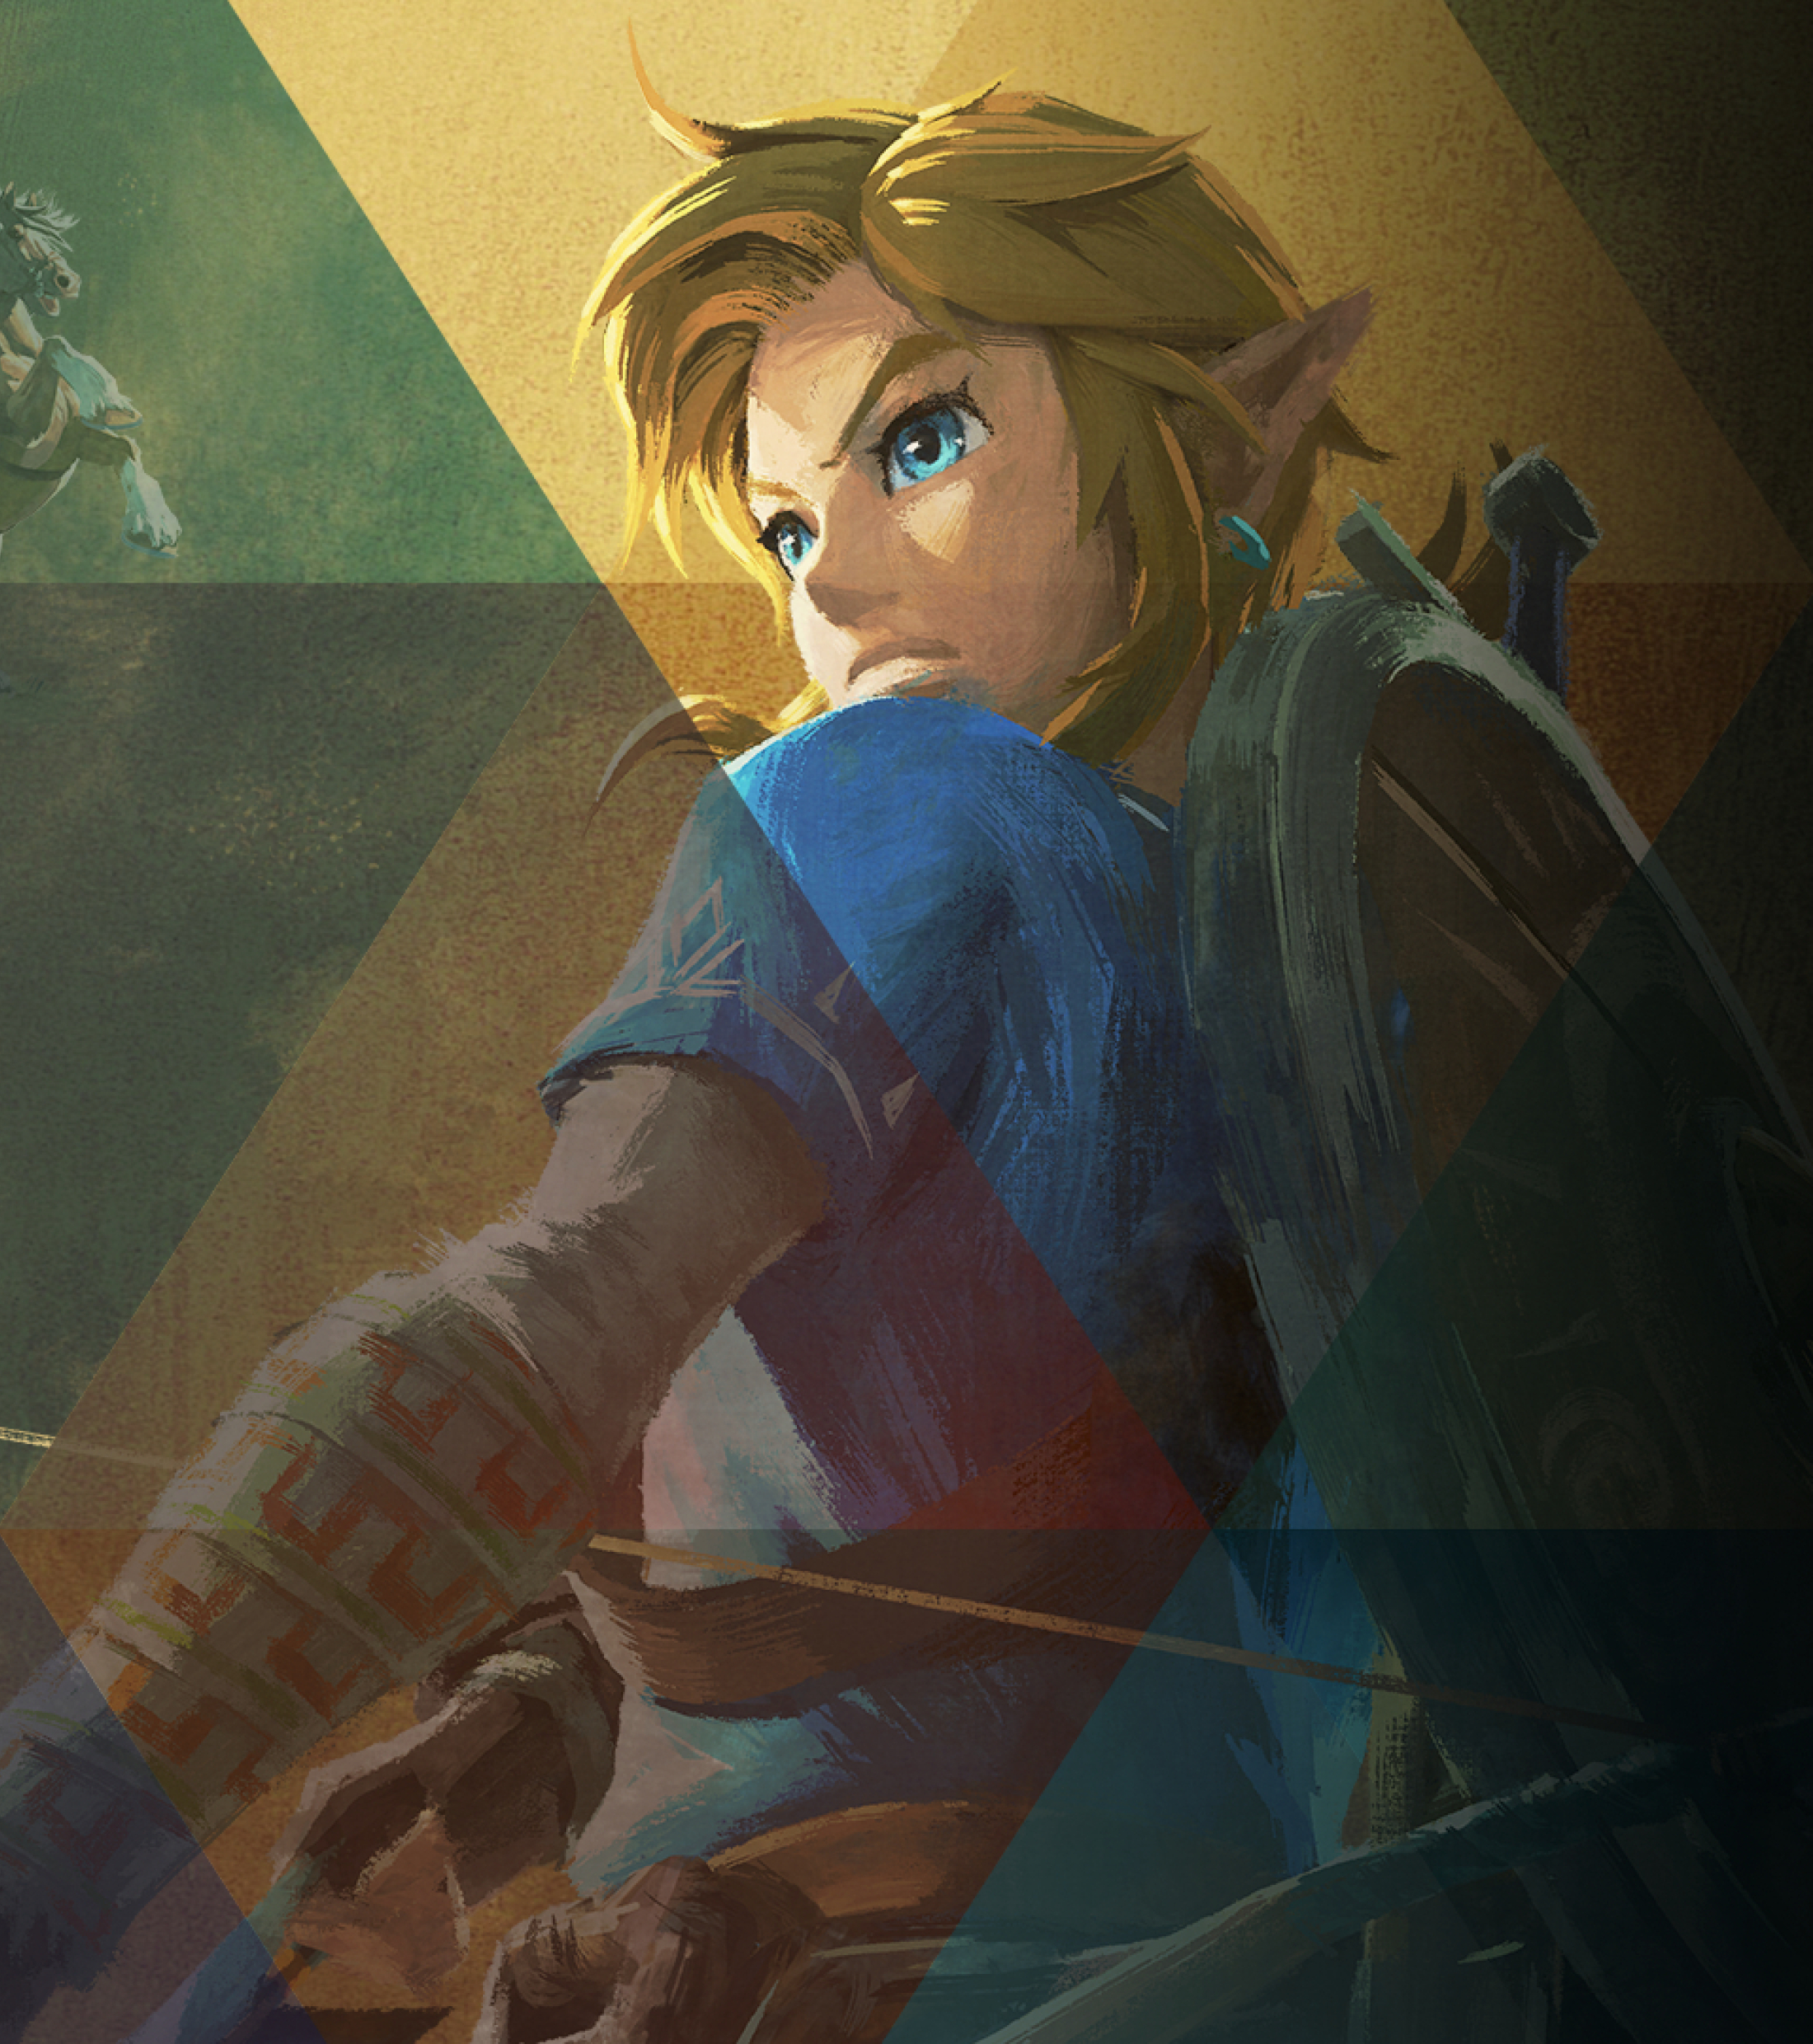 20x2480 The Legend Of Zelda Breath Of The Wild 2 20x2480 Resolution Wallpaper Hd Games 4k Wallpapers Images Photos And Background Wallpapers Den